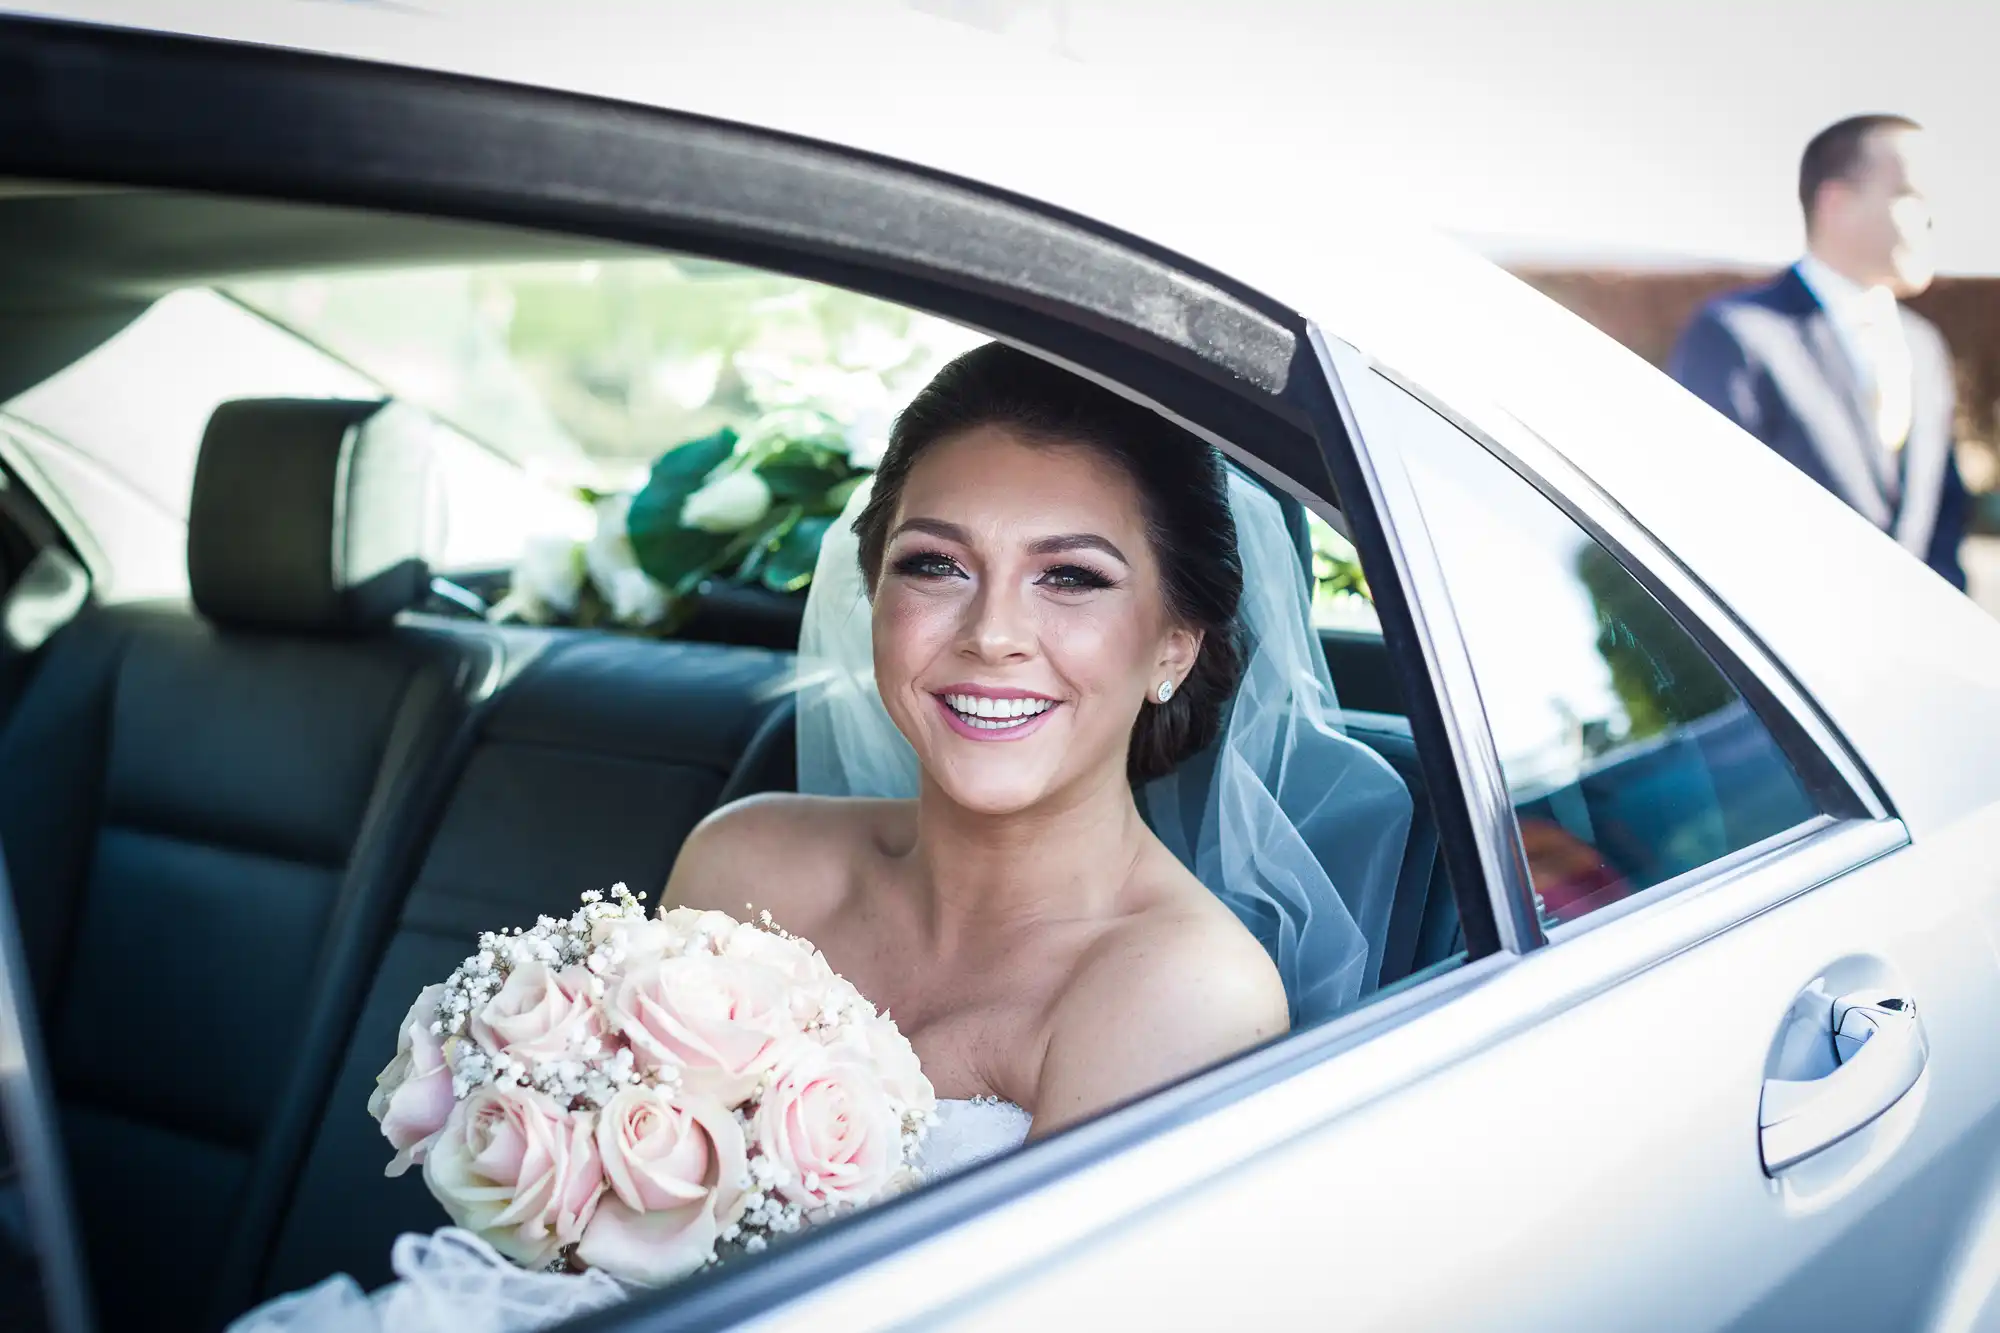 A bride sits in the backseat of a car, smiling and holding a bouquet of pink roses with white accents.